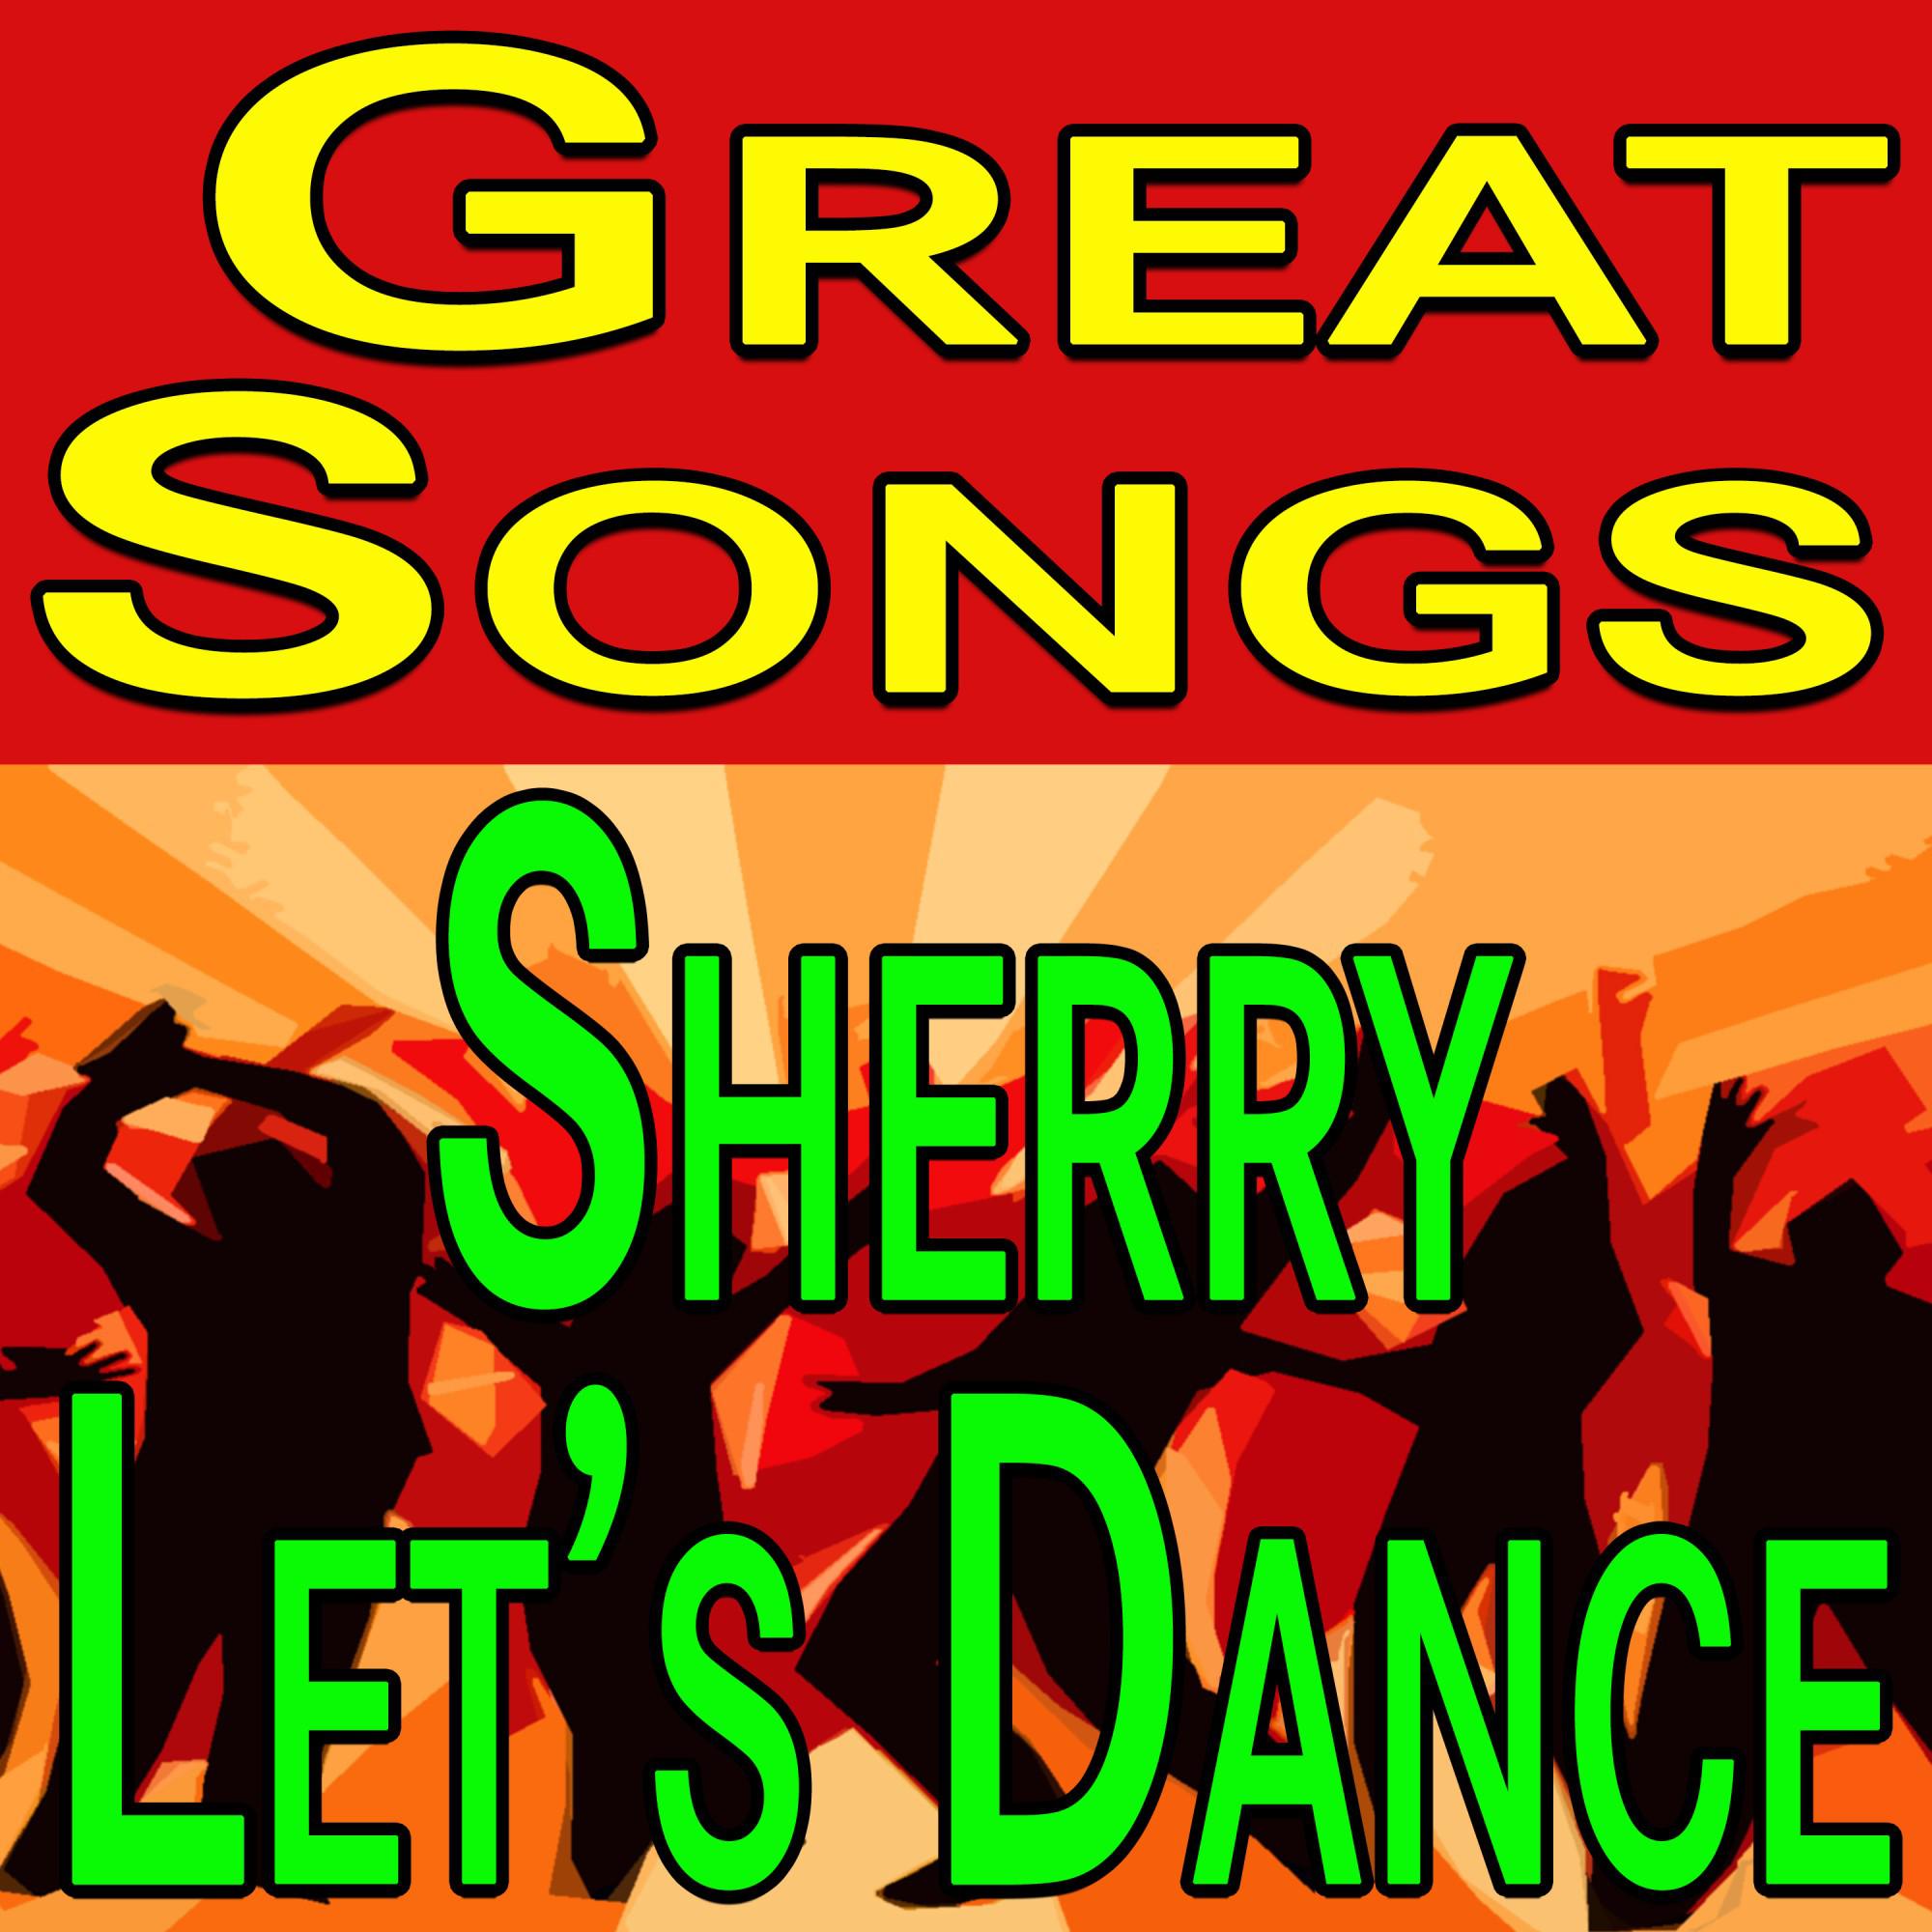 Great Songs Sherry Let's Dance